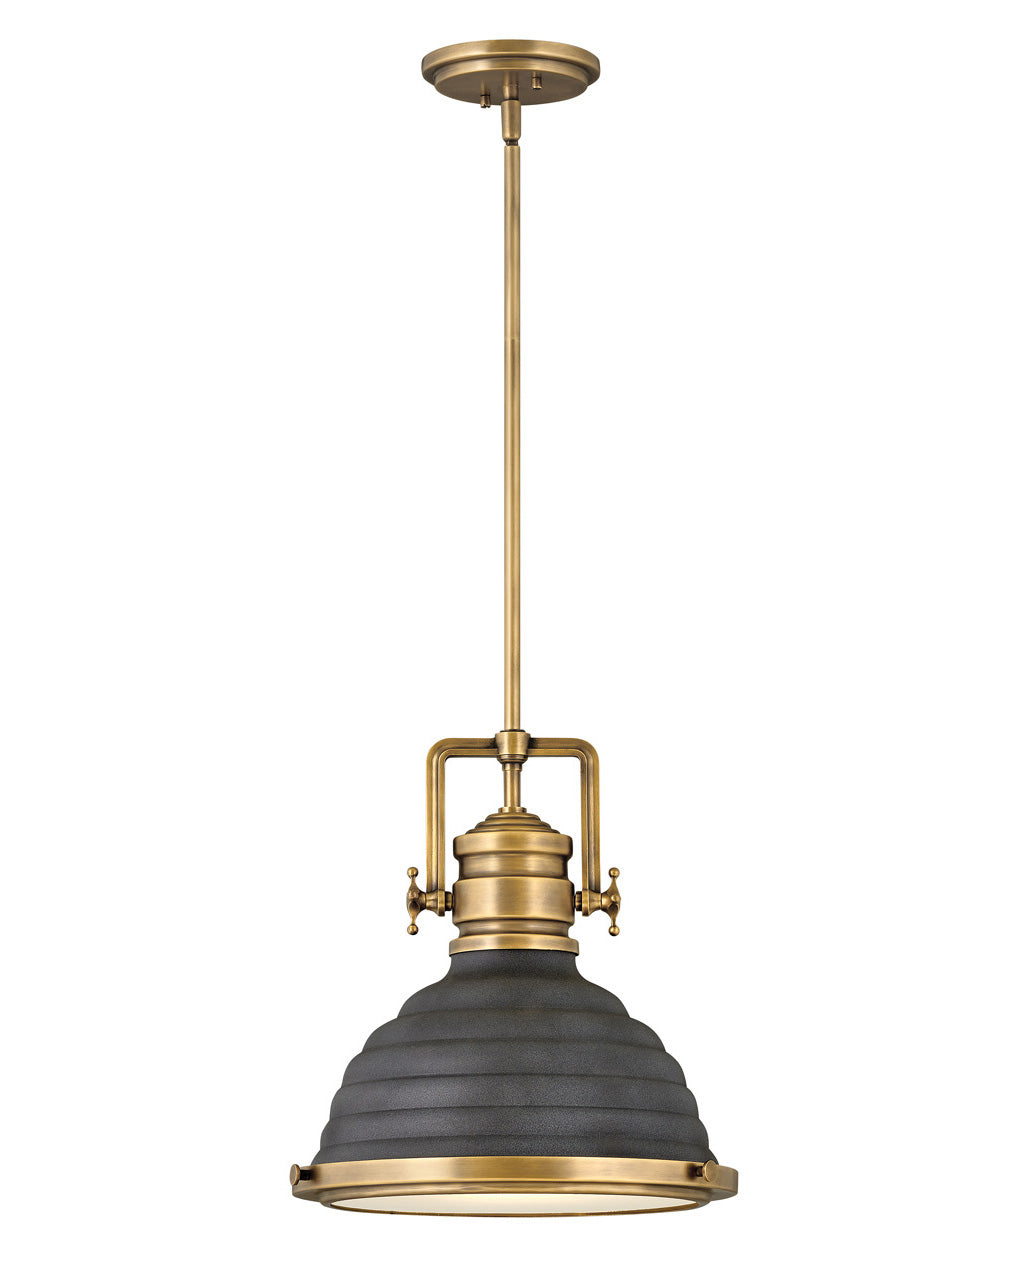 Hinkley Keating Pendant Pendant Hinkley Heritage Brass with Aged Zinc accents 14.25x14.25x14.5 